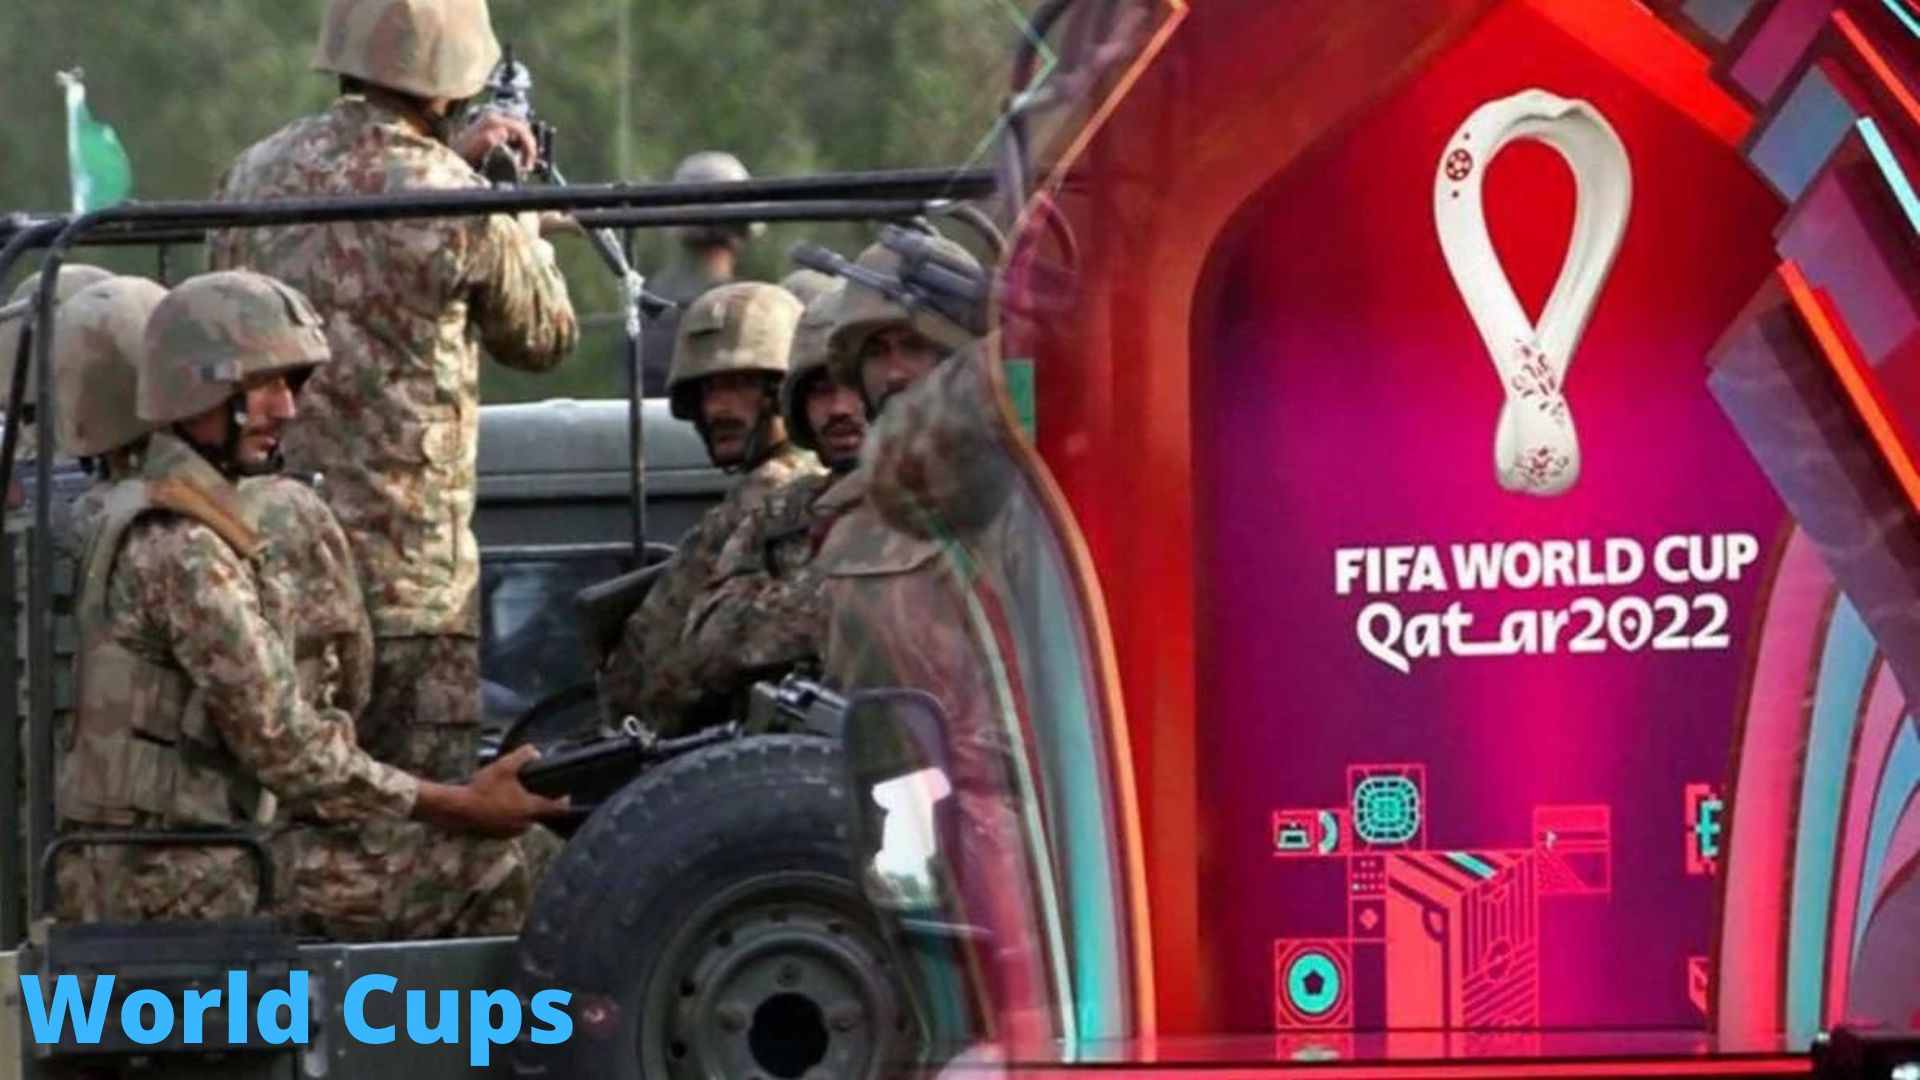 Pakistan Army will be in charge of security in Qatar World Cup. World Cup । worldcups.top । 2022 World Cups । FIFA world cups । club world cup । FIFA 2022 । football world cup । Qatar World Cup